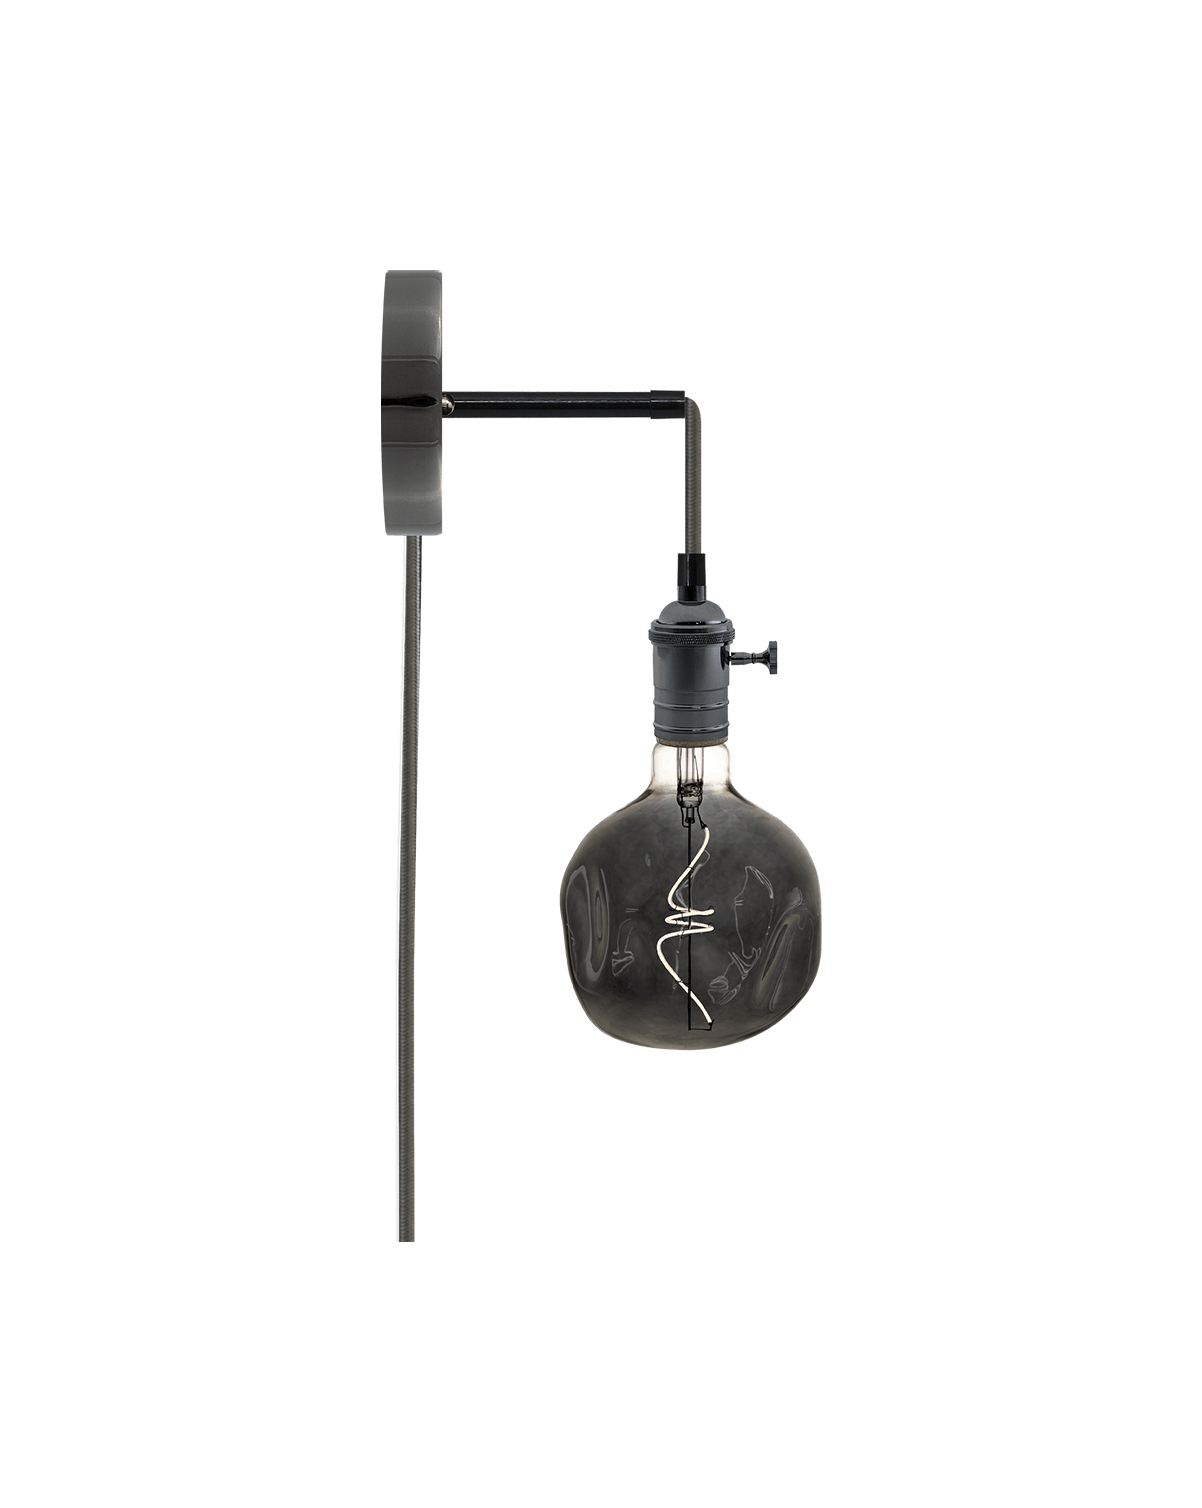 Plug-in Adjustable Wall Sconce: Graphite and Smoke